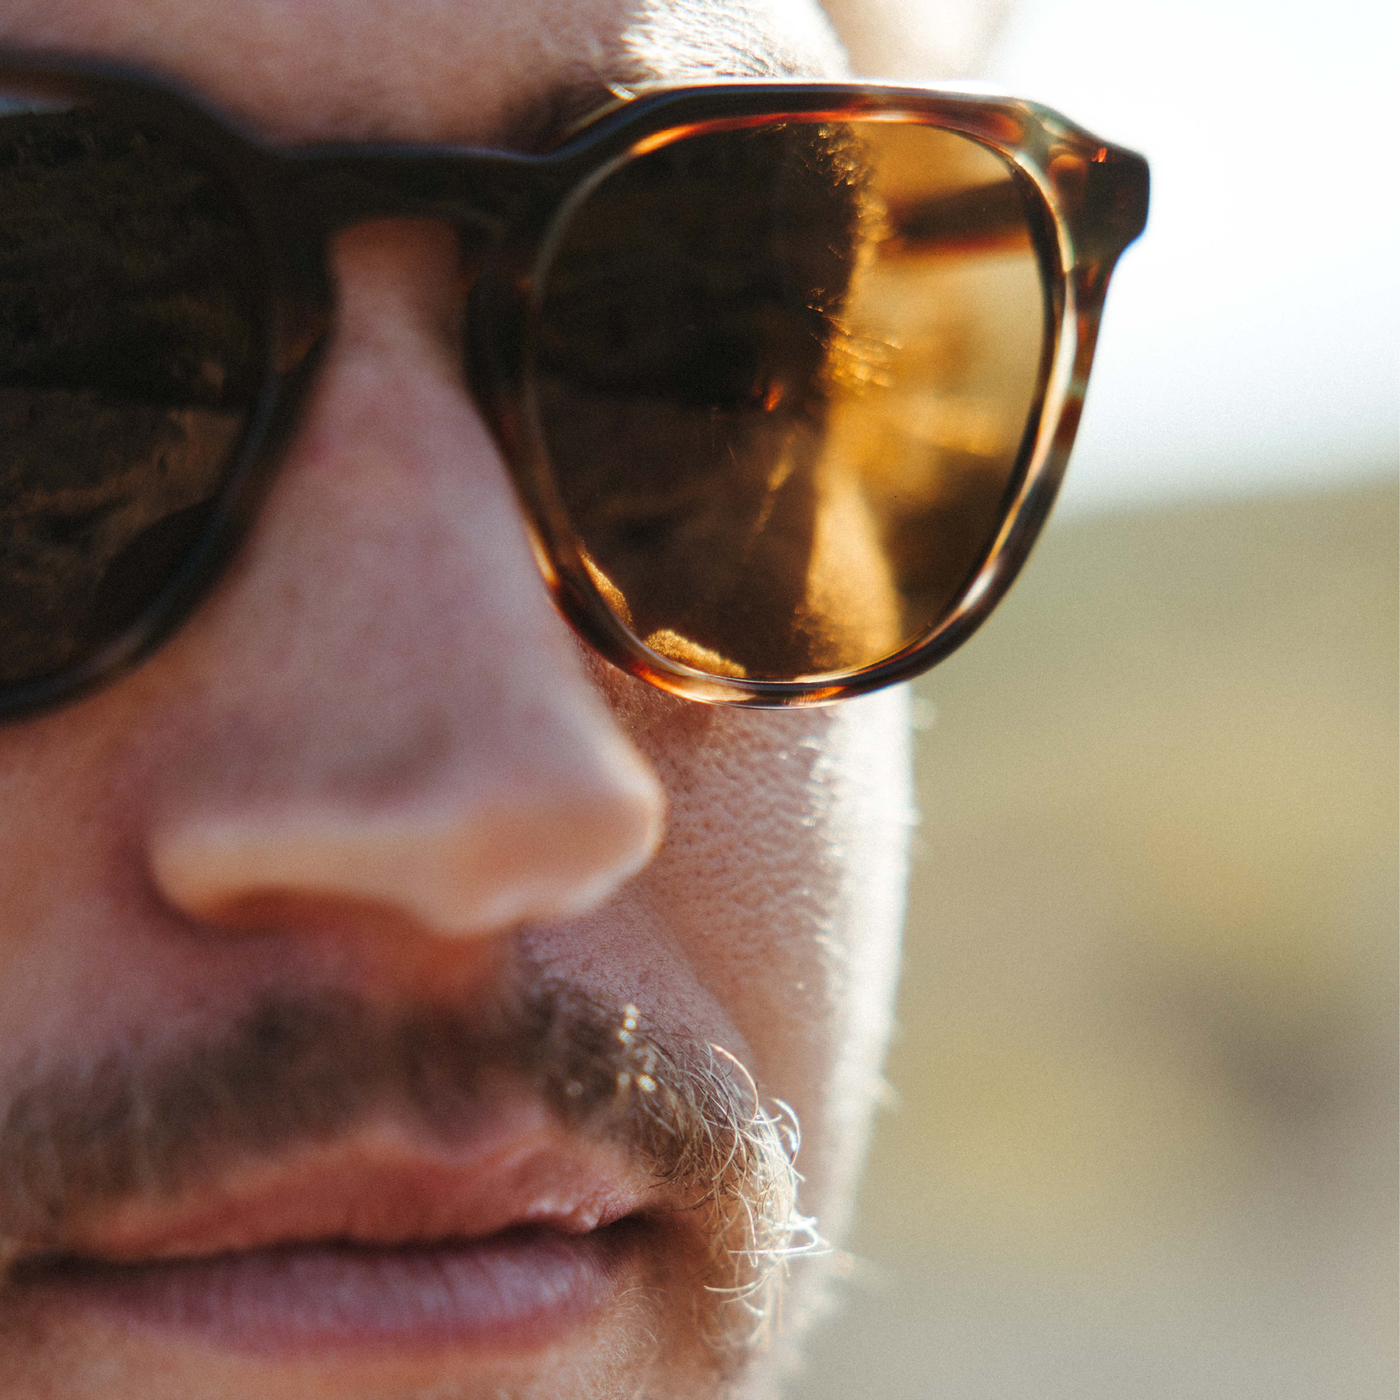 Man wearing sunglasses looking into the distance